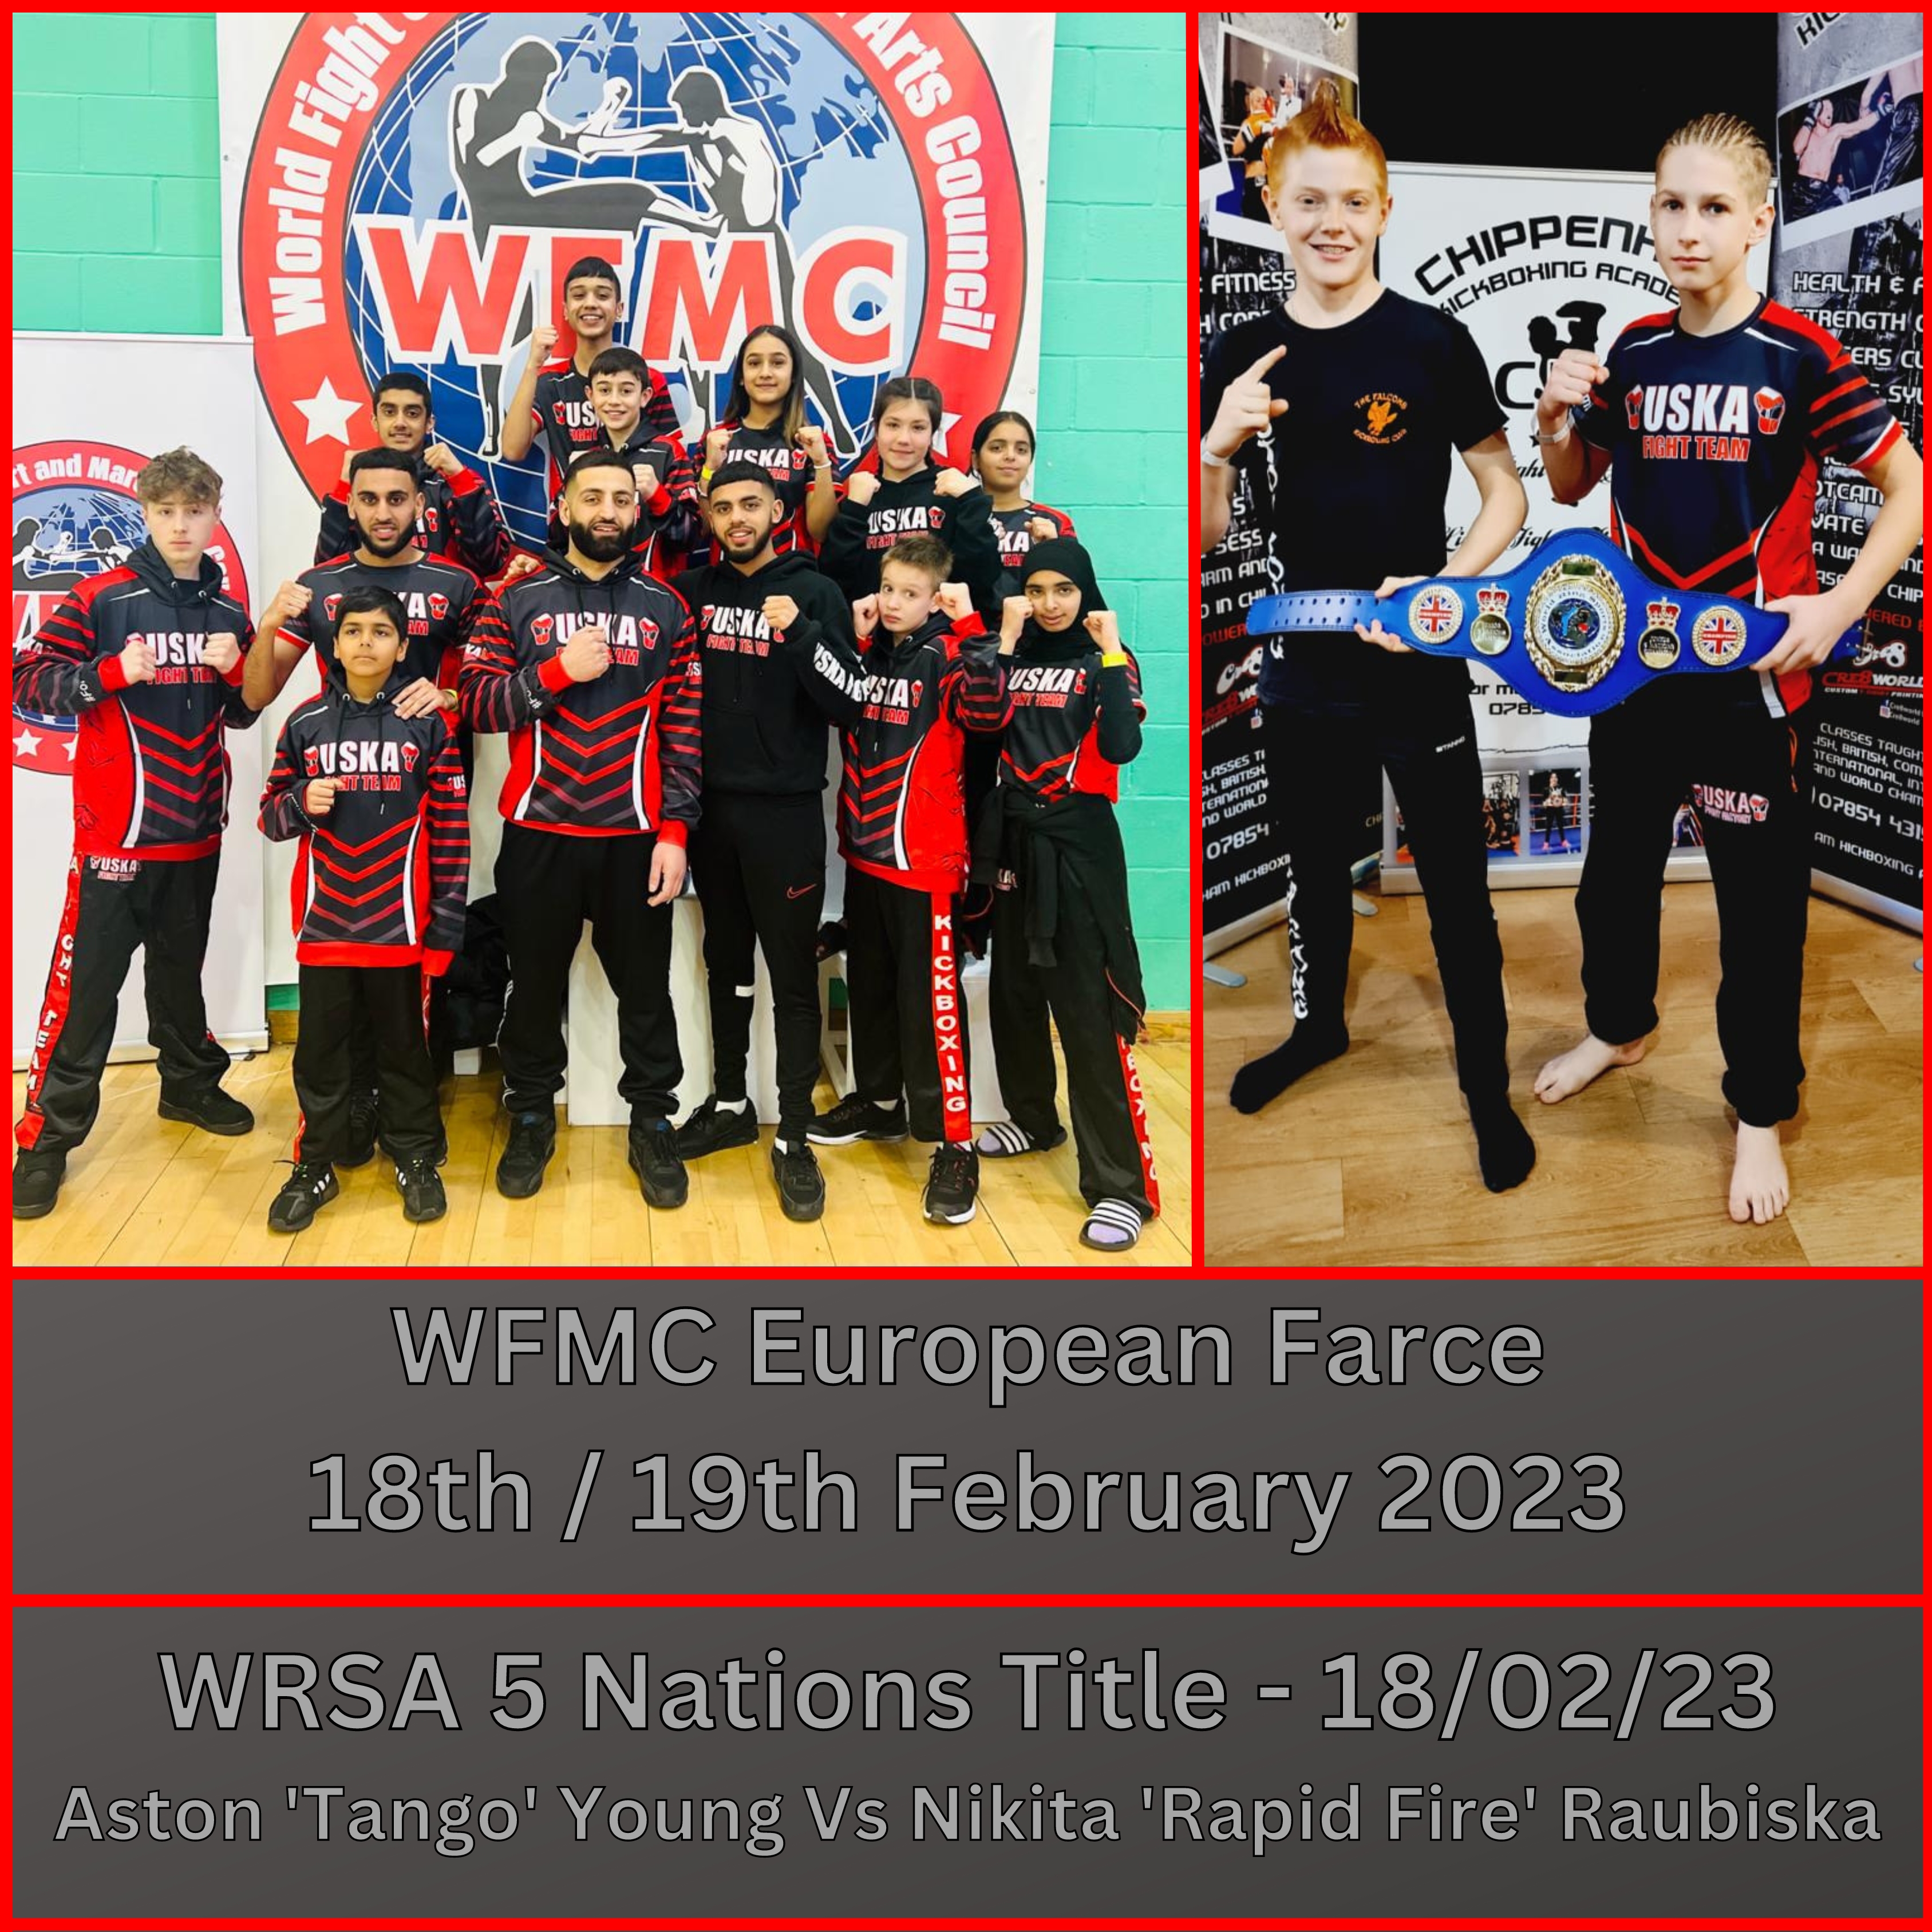 19-02-23 - Disappointing weekend for team USKA on two different events